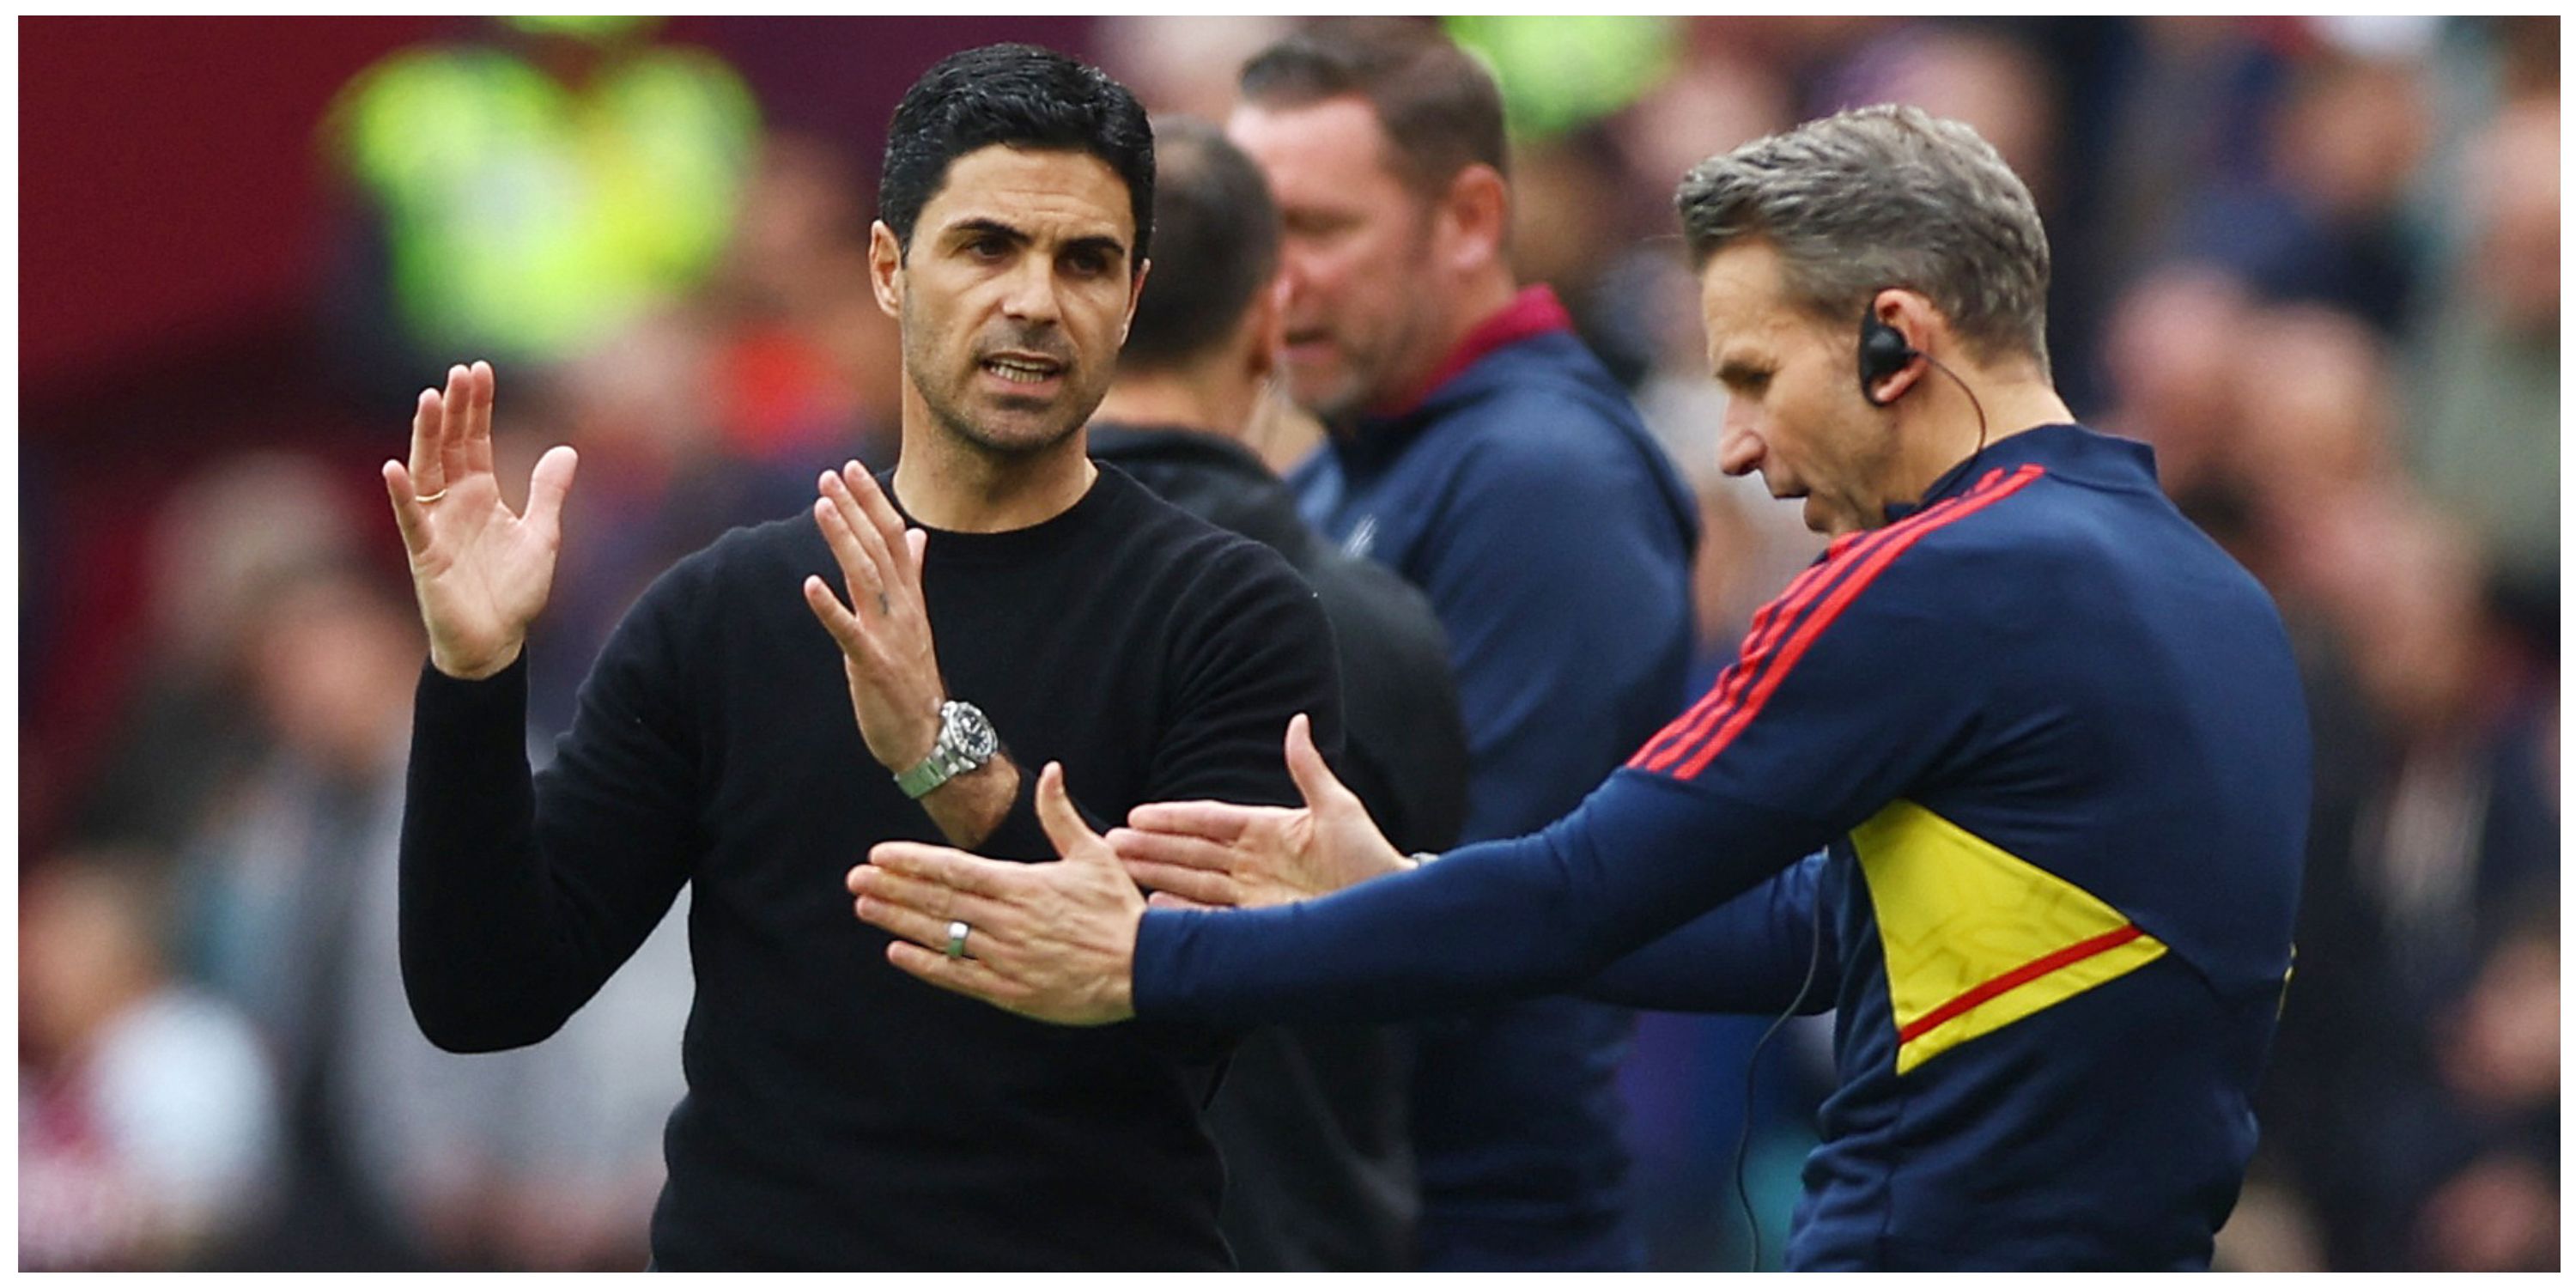 Arsenal manager Mikel Arteta and assistant manager Albert Stuivenberg